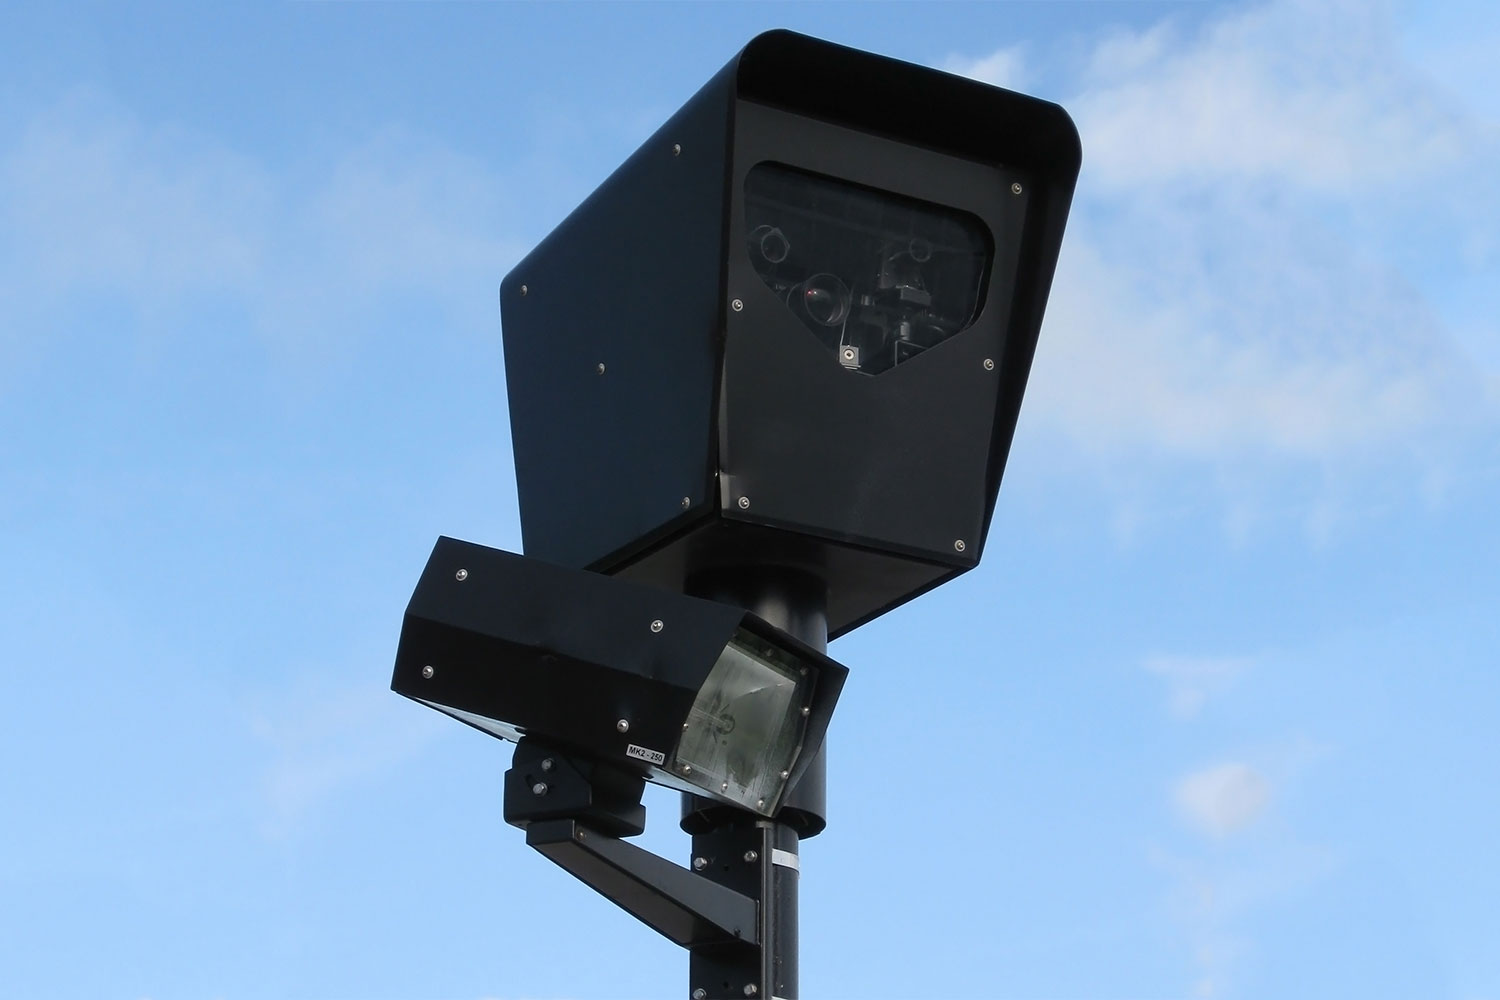 New products aim to foil red-light cameras, but do they work?